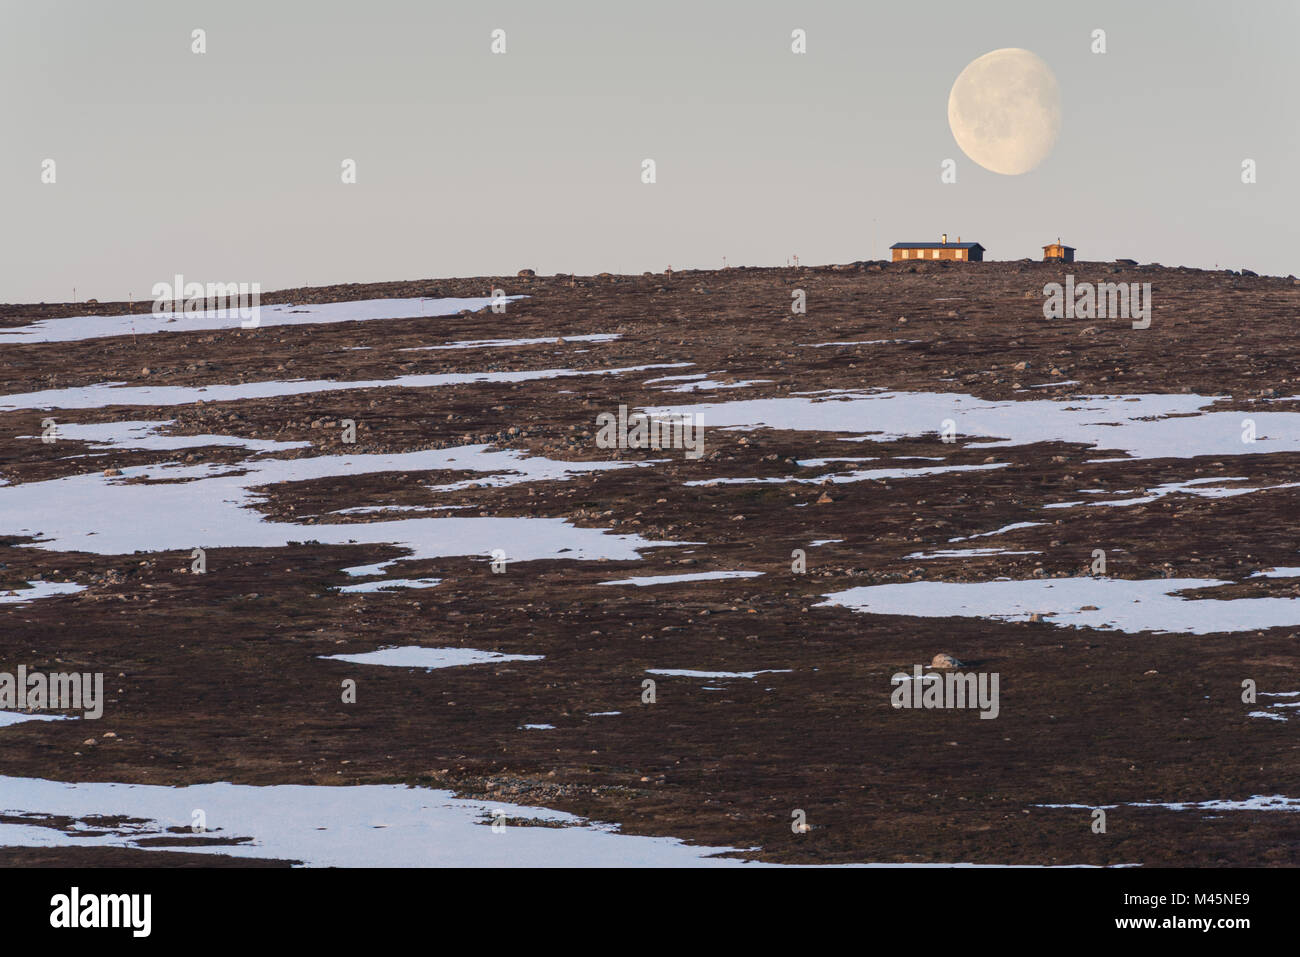 cabins in midnight sun, Dundret, Lapland, Sweden Stock Photo